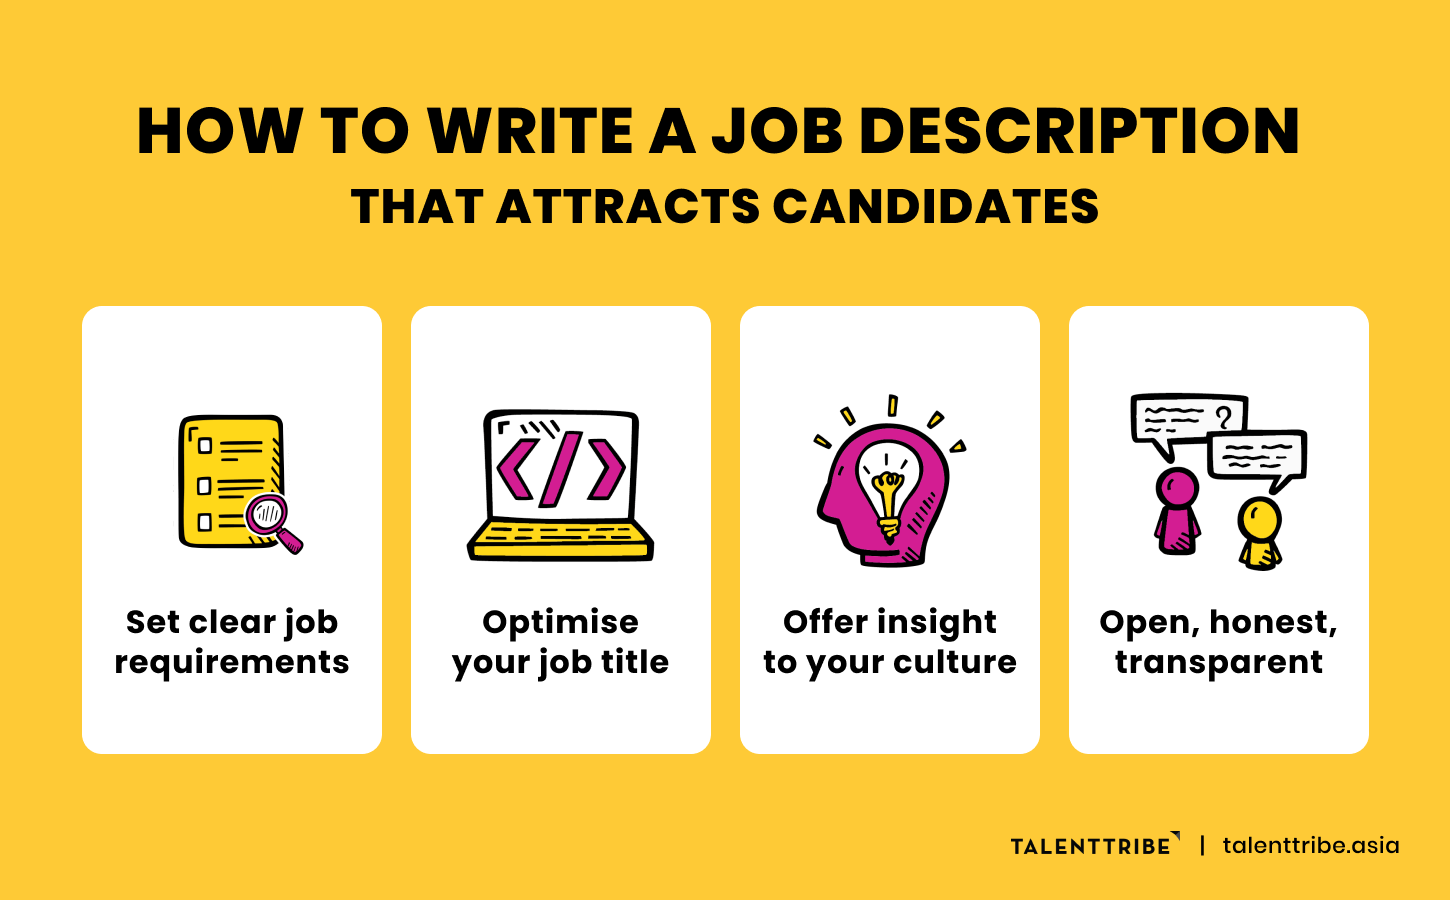 How To Write An Effective Job Description That Attracts Candidates